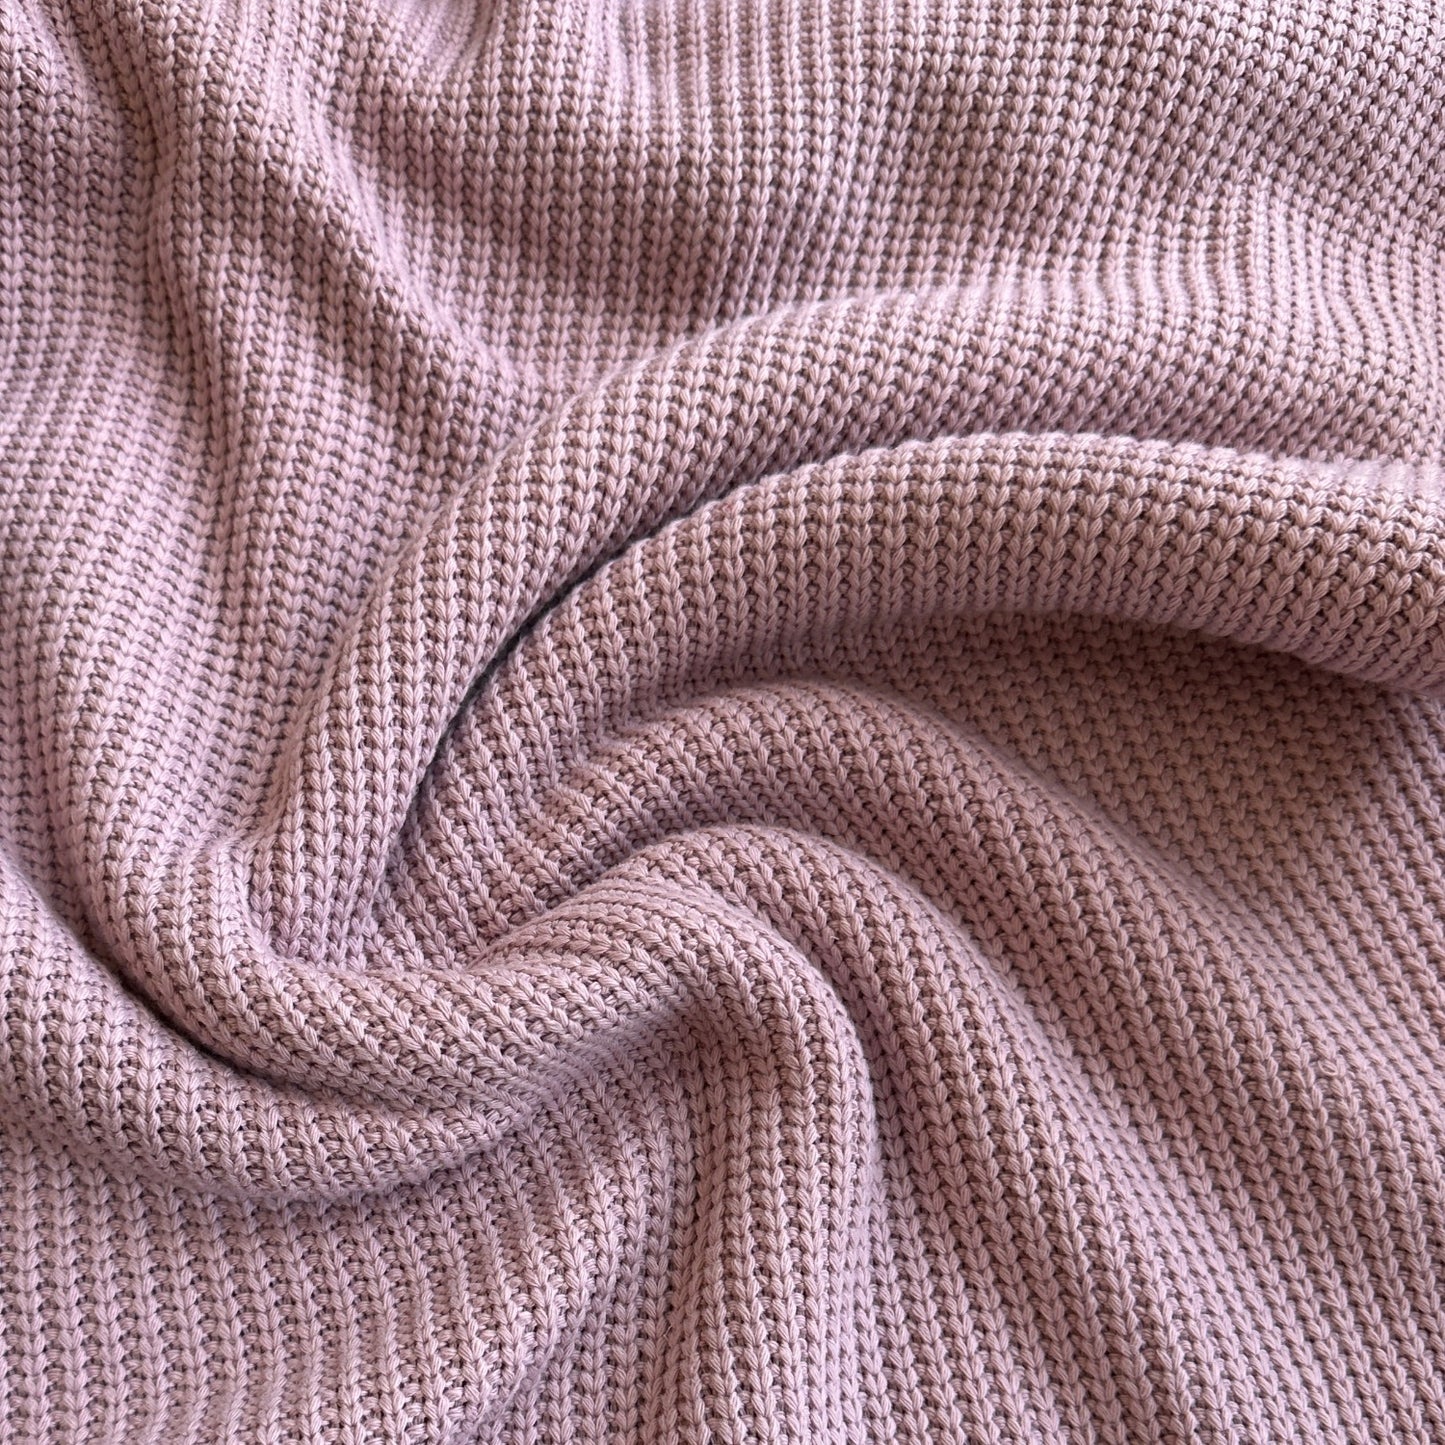 Chunky Fisherman Style Knit Fabric in Old Rose